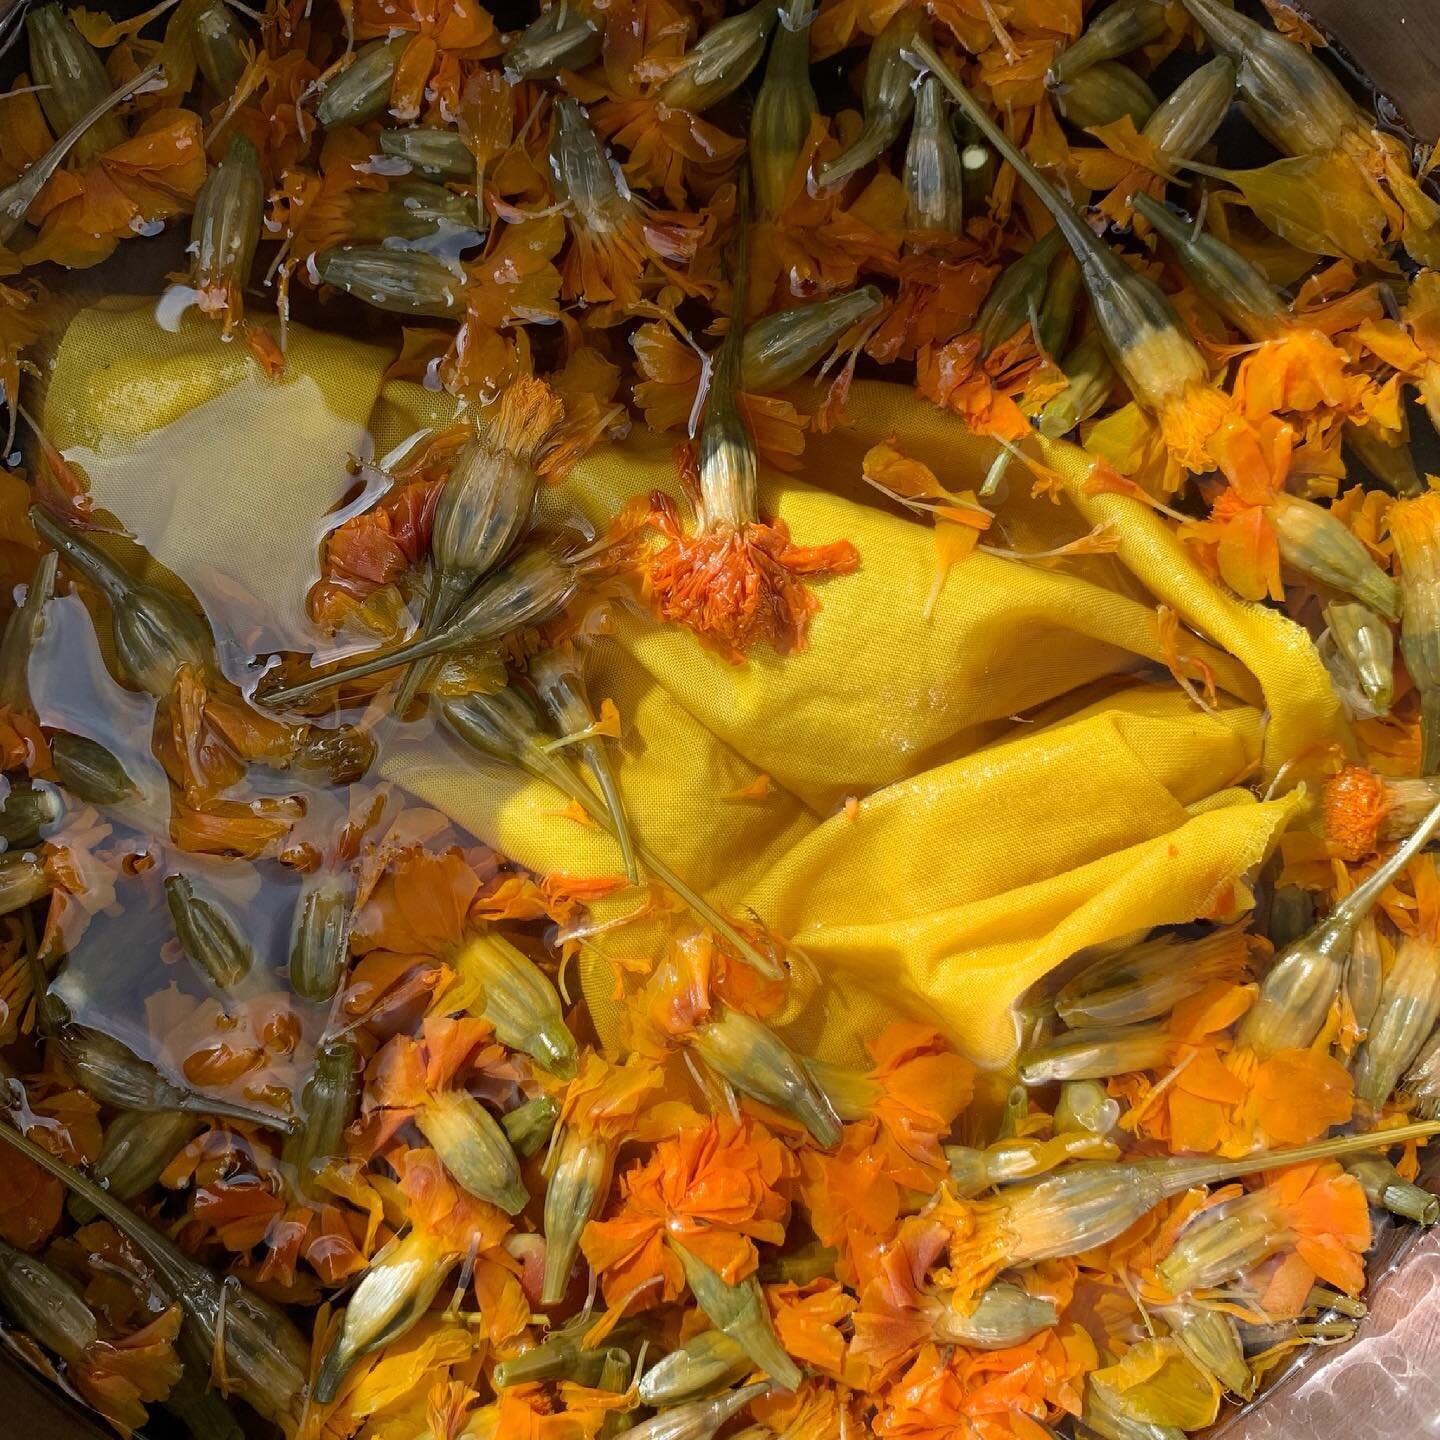 Using up the freezer stash of garden flowers to make space for this year&rsquo;s blooms. First up: a nice, big pot of marigolds! Letting it cool off in the sunshine before the rinse and color shift tomorrow. ☀️
.
.
.
.
#marigold #dyeflowers #backyard